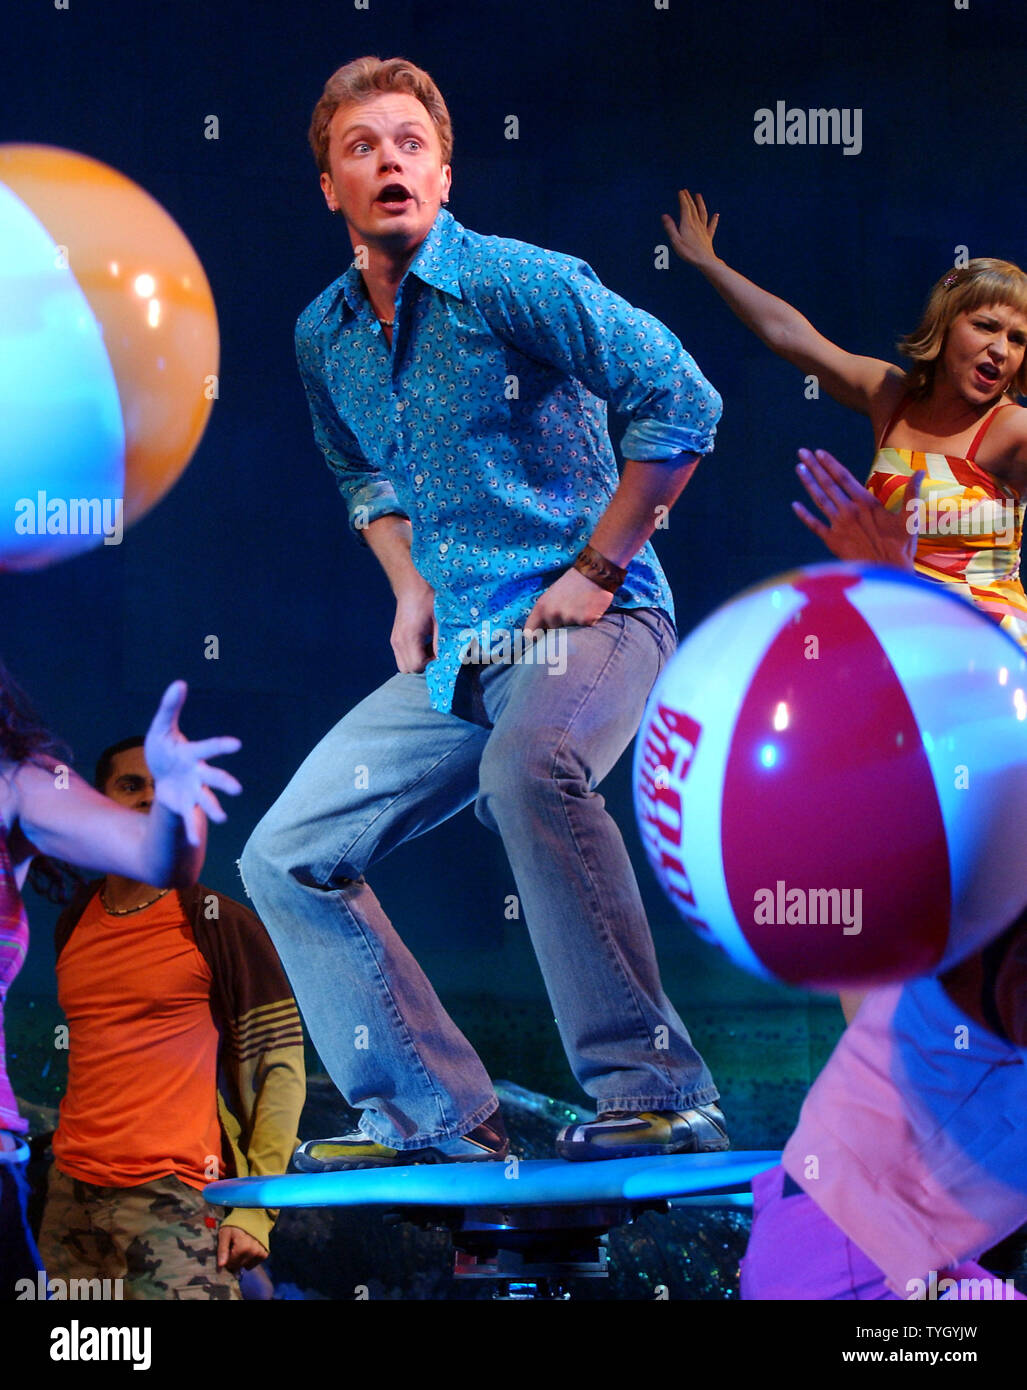 Heath Calvert and cast members take their opening night curtain call bows in the Broadway musical 'Good Vibrations' which opened on 1/27/05 at New York's Eugene O' Neill theatre and features the music and lyrics of Brain Wilson and the Beach Boys.  (UPI Photo/Ezio Petersen) Stock Photo